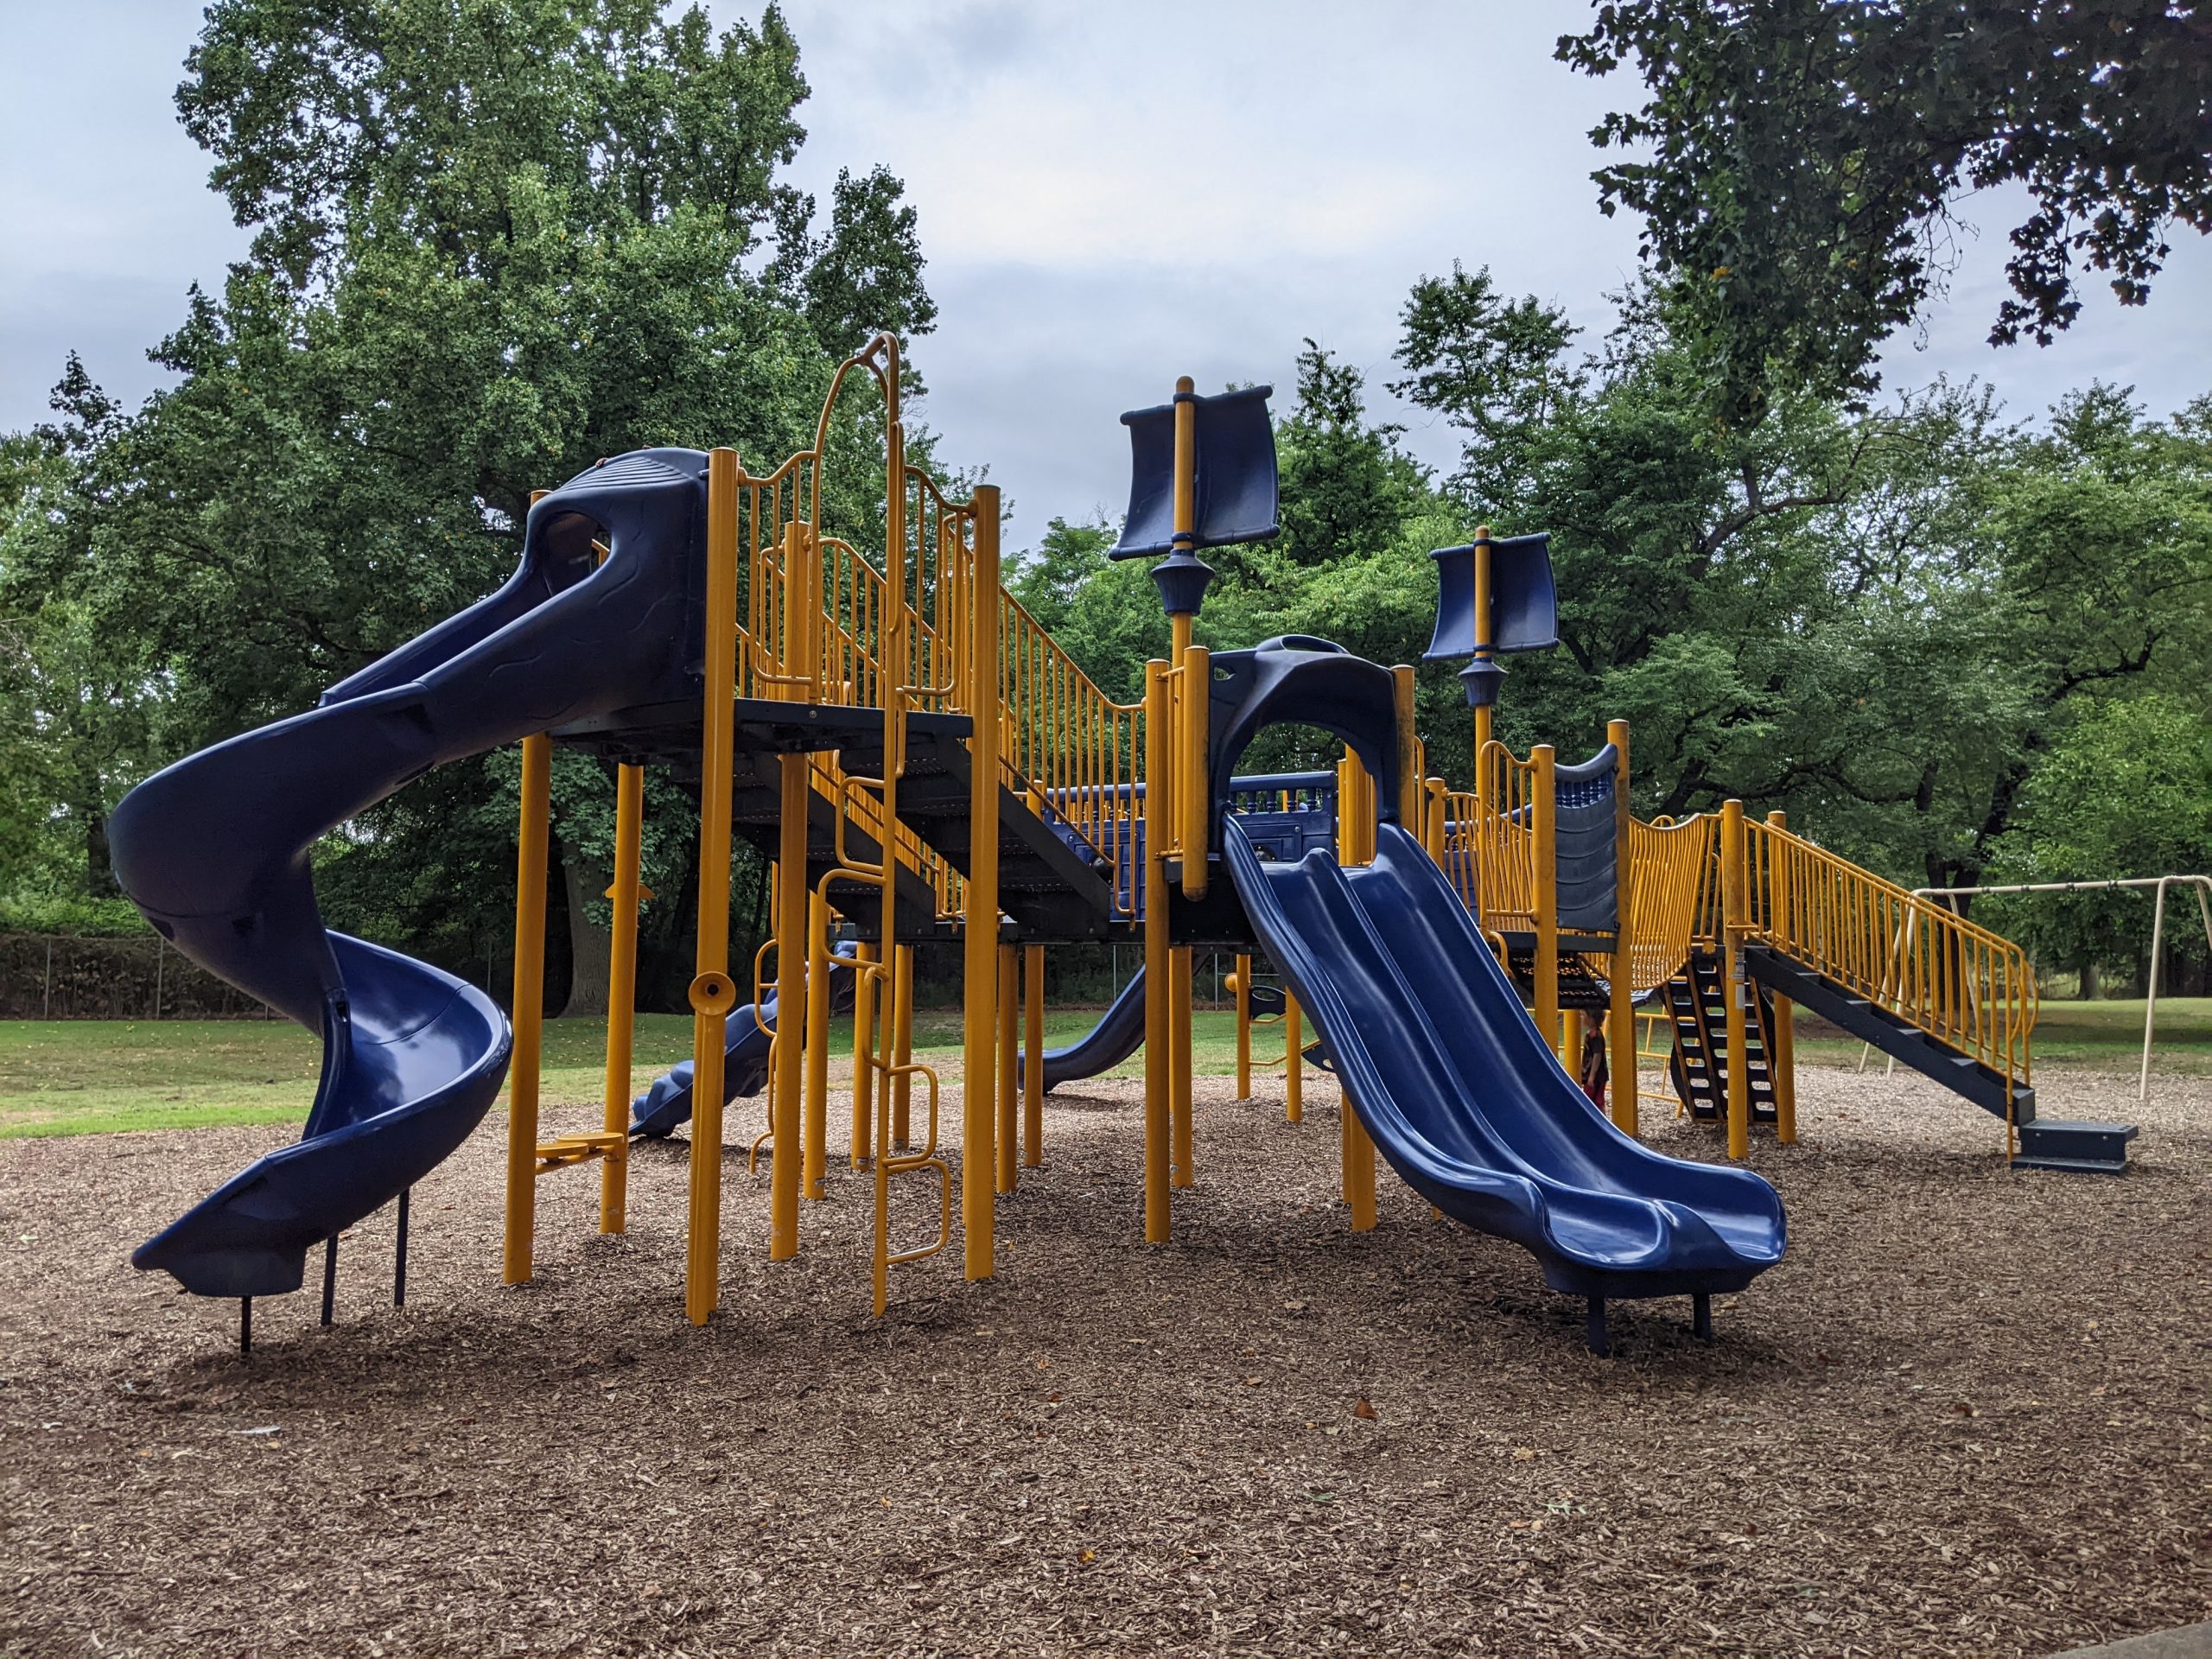 WIDE - Large playground At Red Bank Battlefield Park Playground in National Park NJ